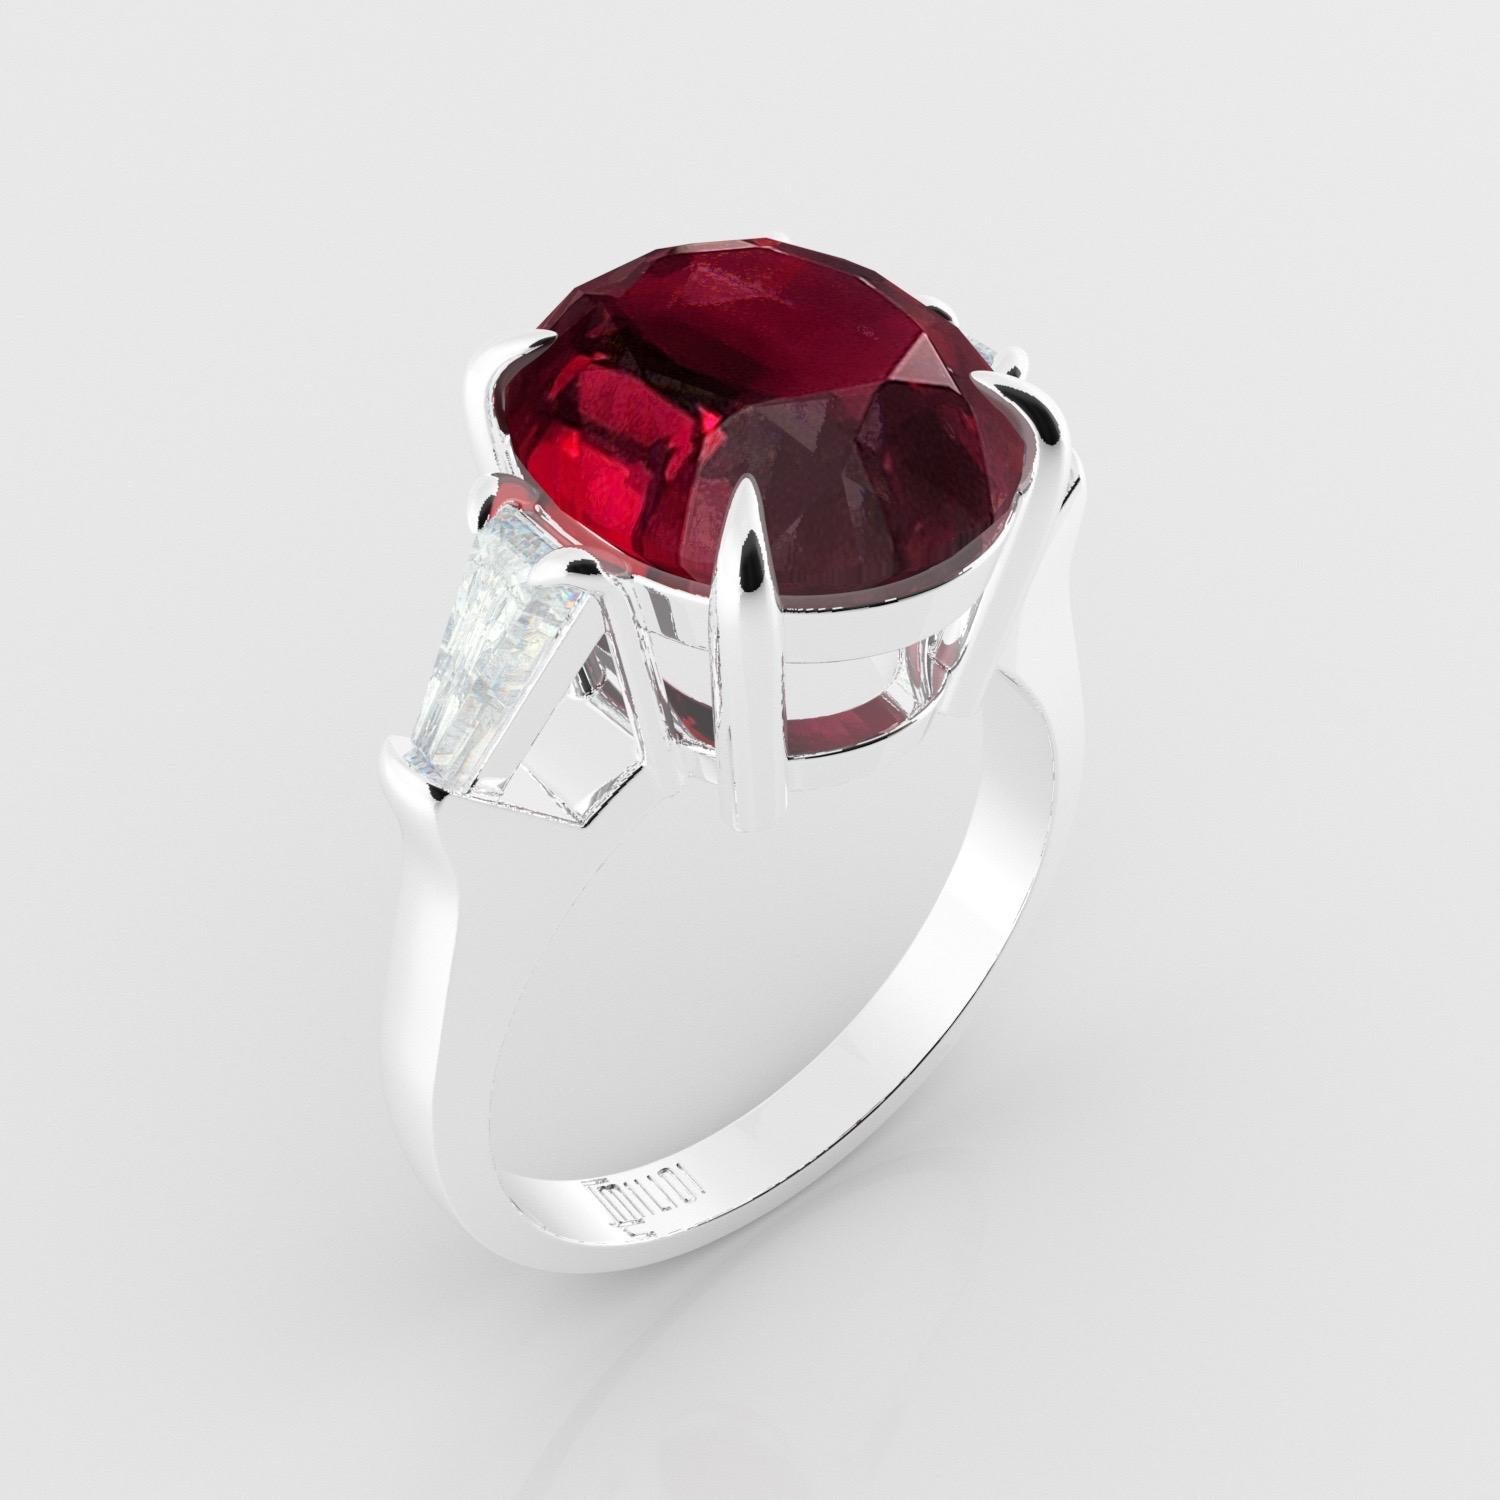 From the museum vault at Emilio Jewelry New York,

A magnificent ruby certified as vivid red and pigeons blood sits in the center of our handmade classic ring. Please inquire for certificate, and details. The title consists of the approximate total